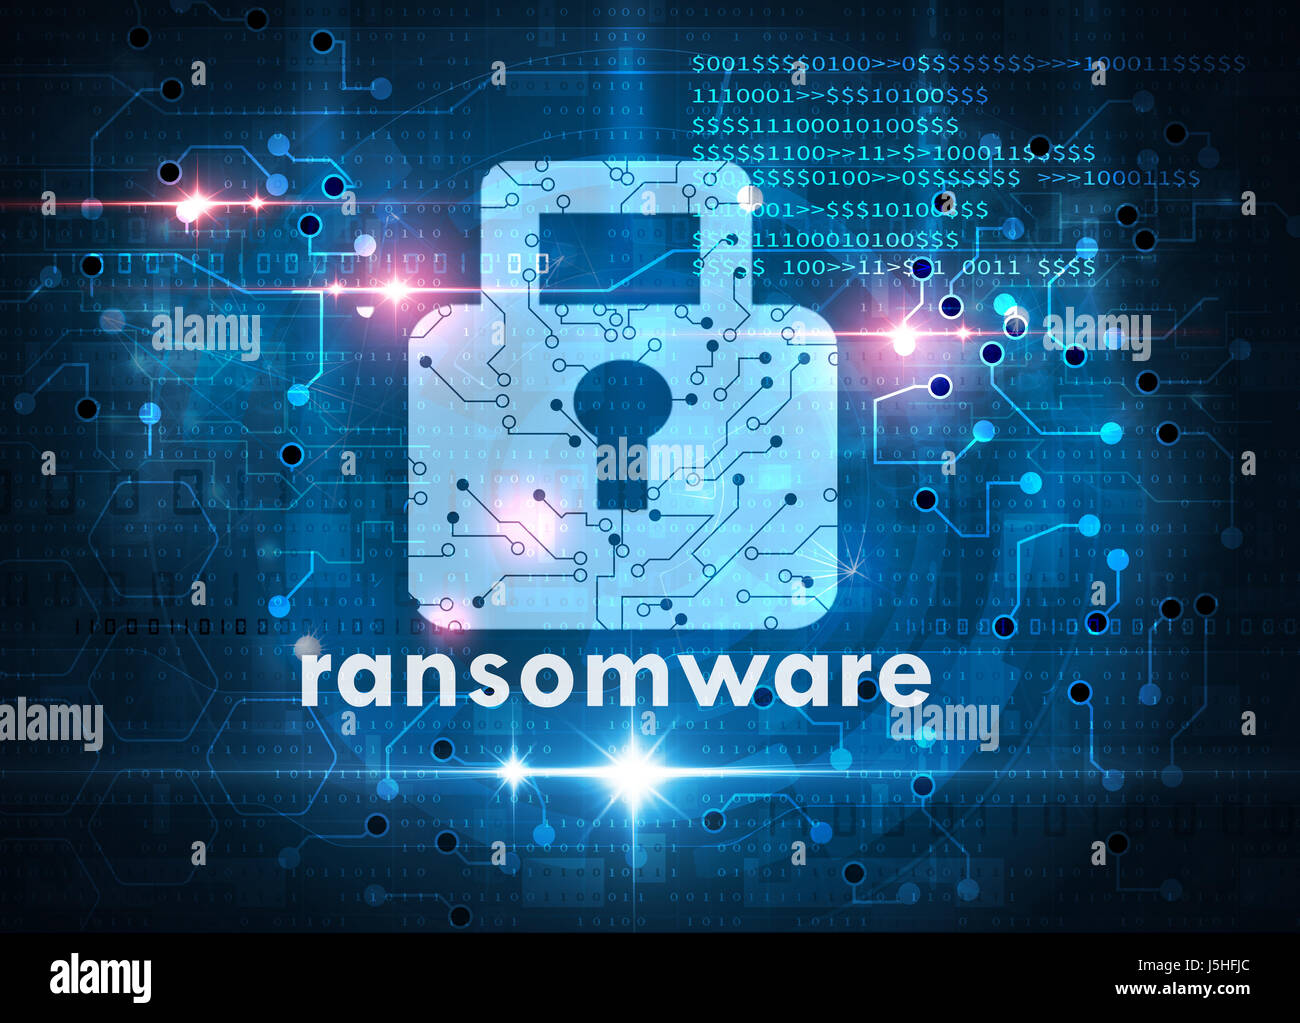 ransomware attack cybersecurity concept Stock Photo